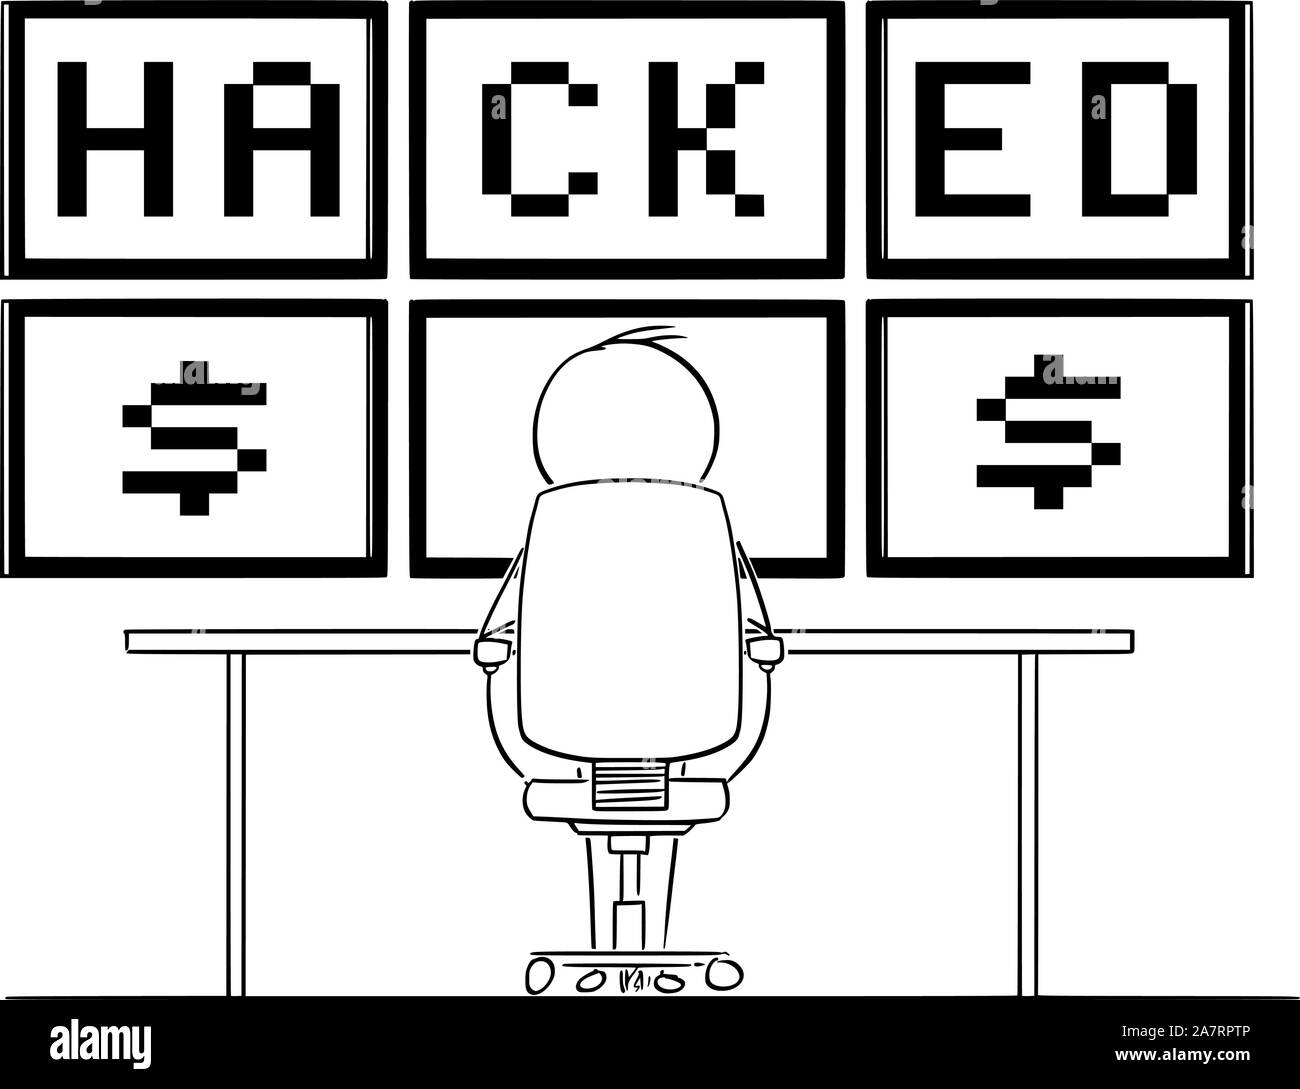 Vector cartoon stick figure drawing conceptual illustration of man or businessman sitting in front of six computer monitors mounted on wall, and watching the hacked text. Concept of digital crime. Stock Vector